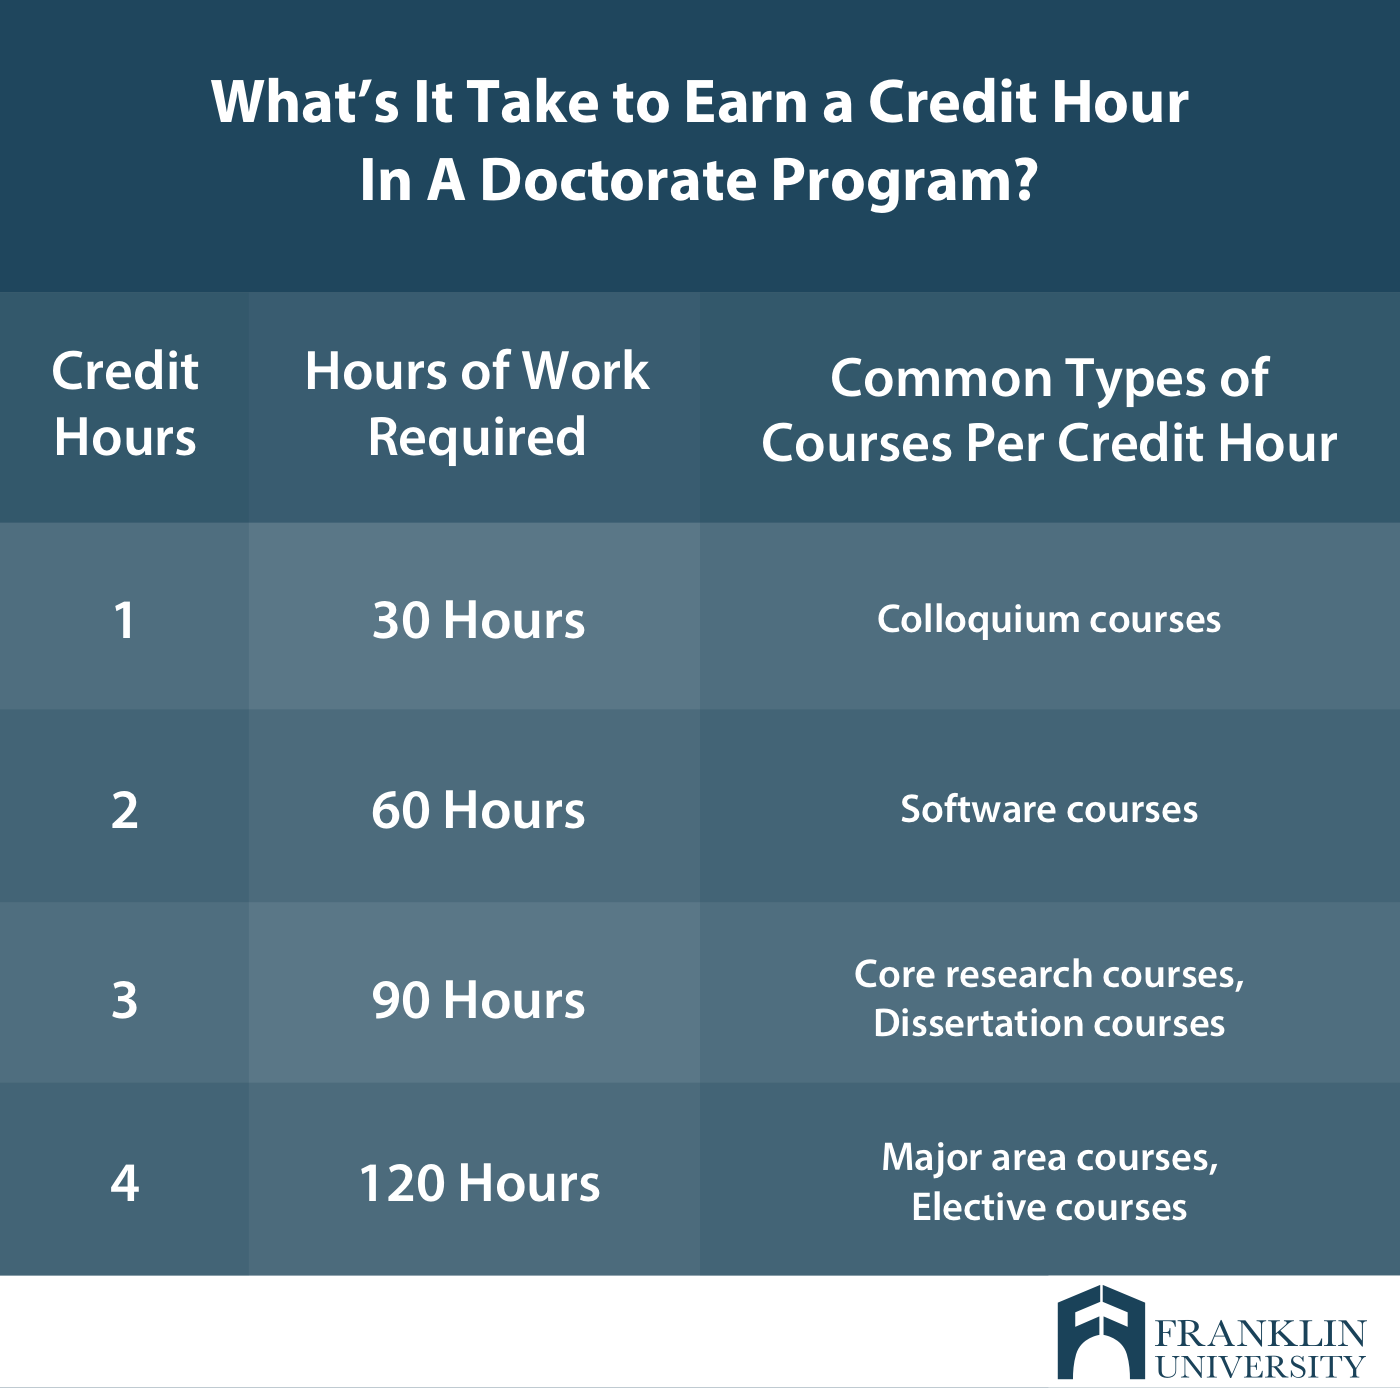 graphic describing what it takes to earn a credit hour in a doctorate program